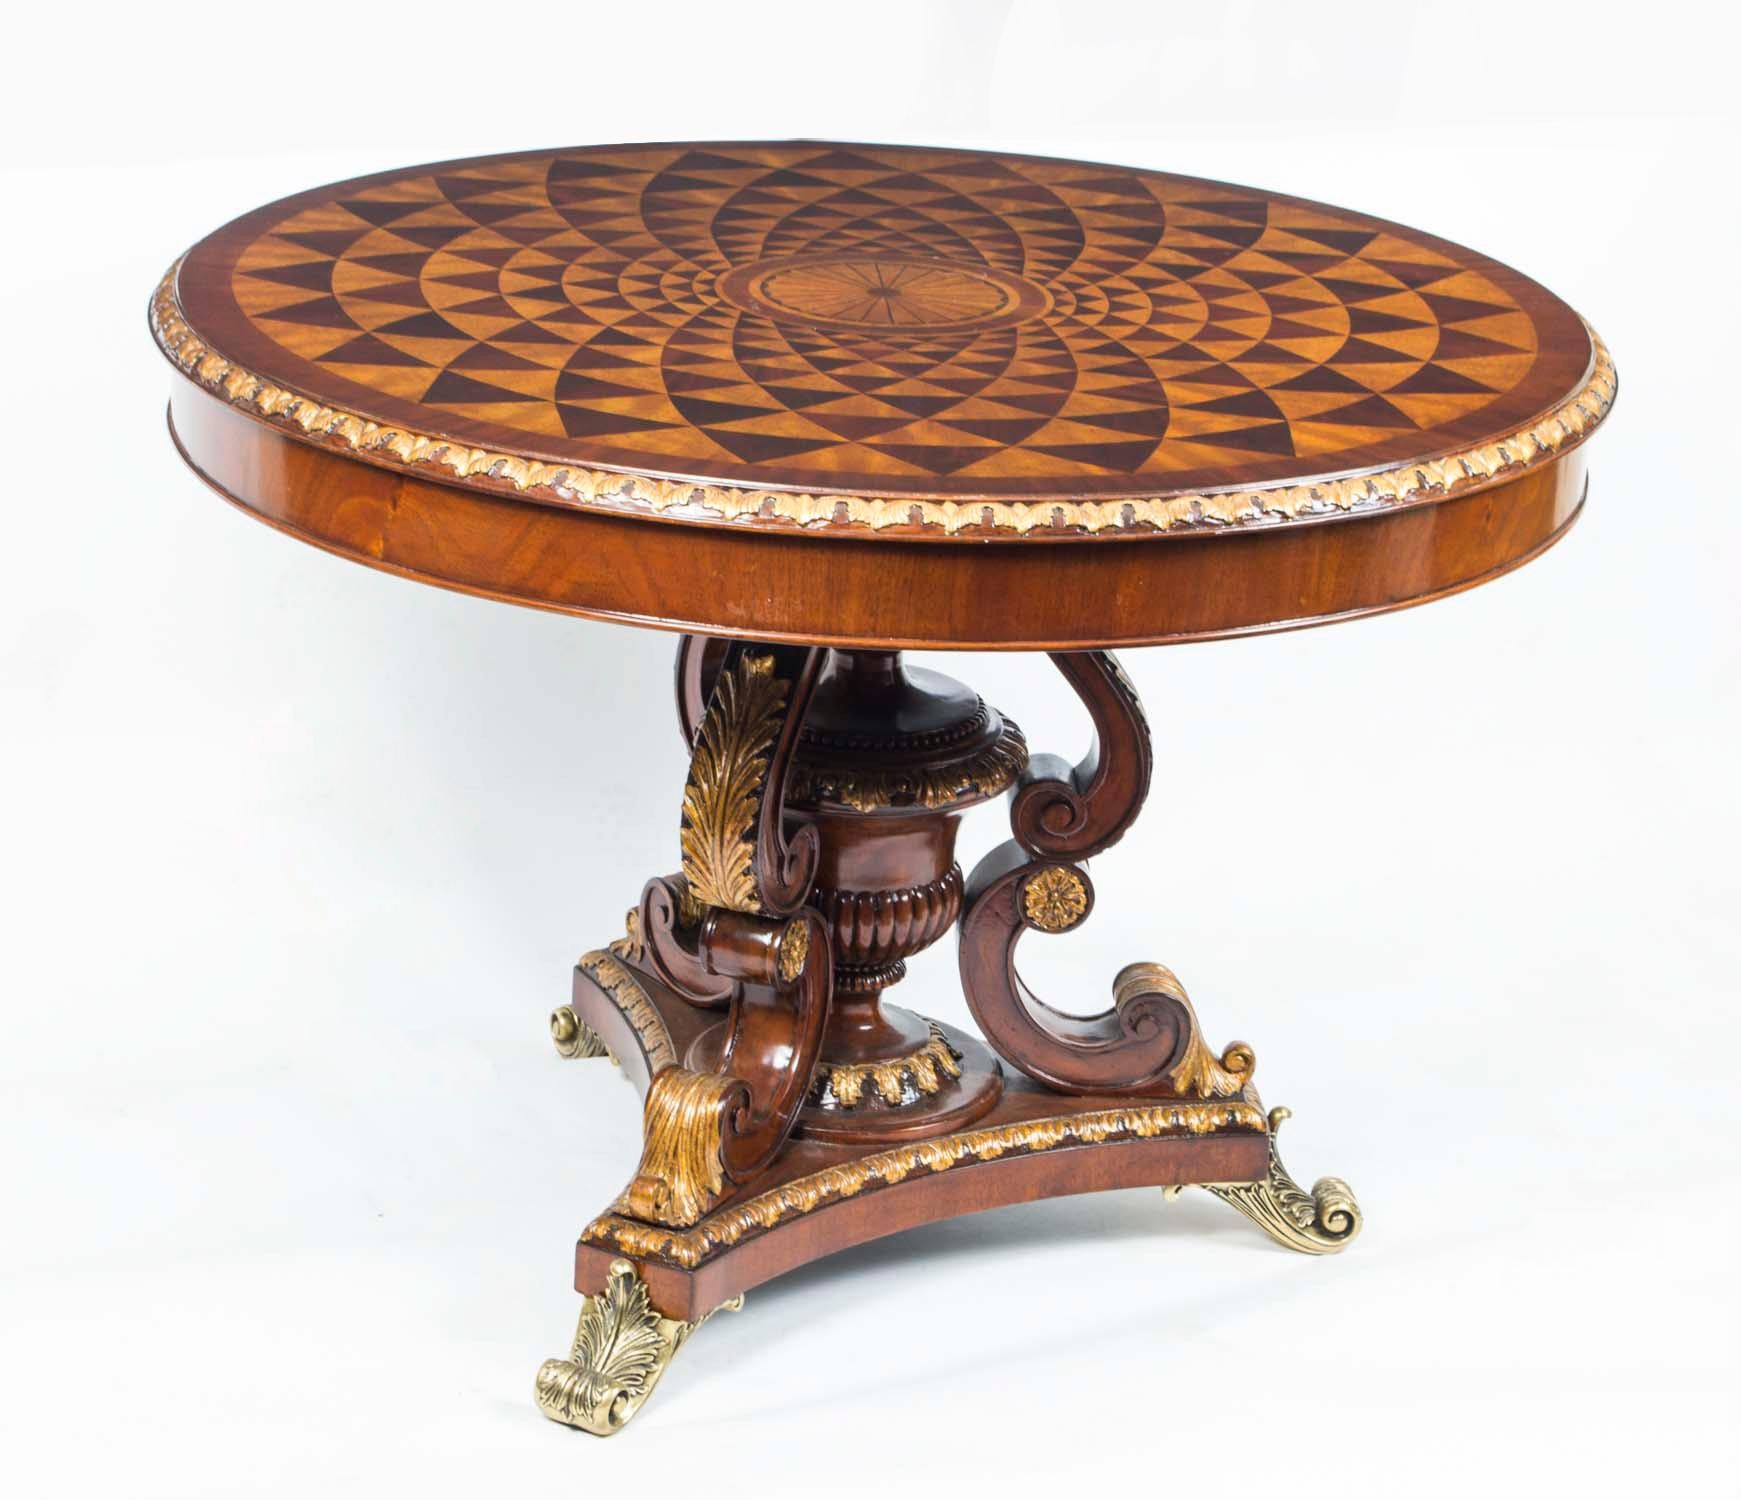 This is an  exquisite vintage mahogany Regency Revival  parquetry 'trompe l'oeil' centre table,  dating from the second half of the 20th Century.

The table is supported with a single central stem of hand carved mahogany with exquisite gilded